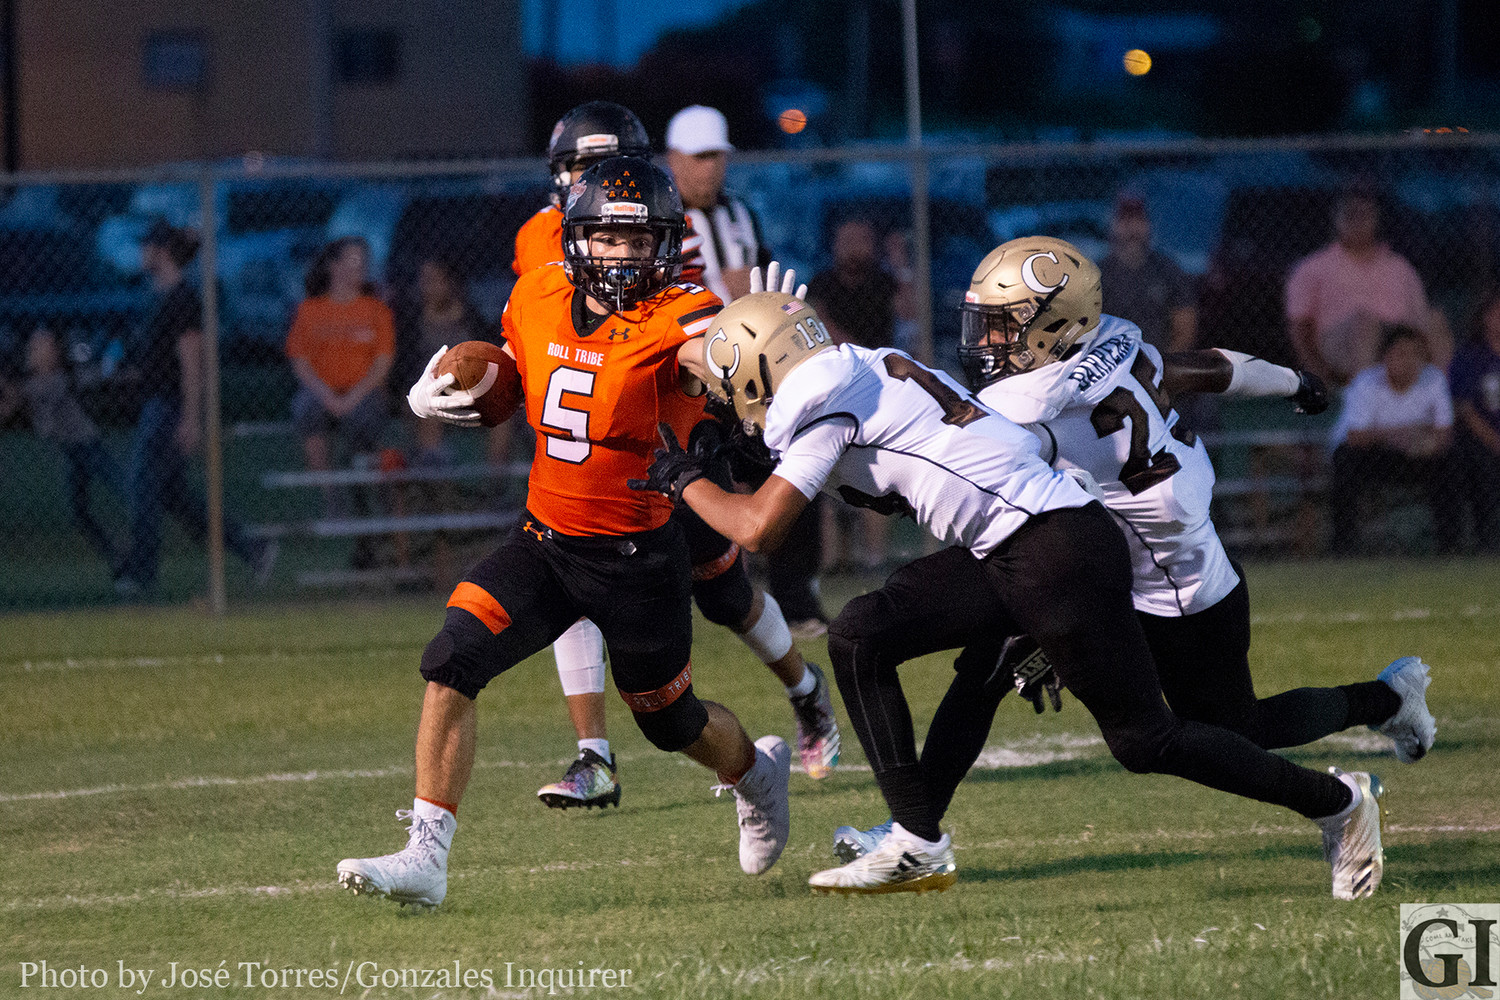 Seth Gibson (5) had just two rushes for 12 yards in Gonzales' 42-8 victory.